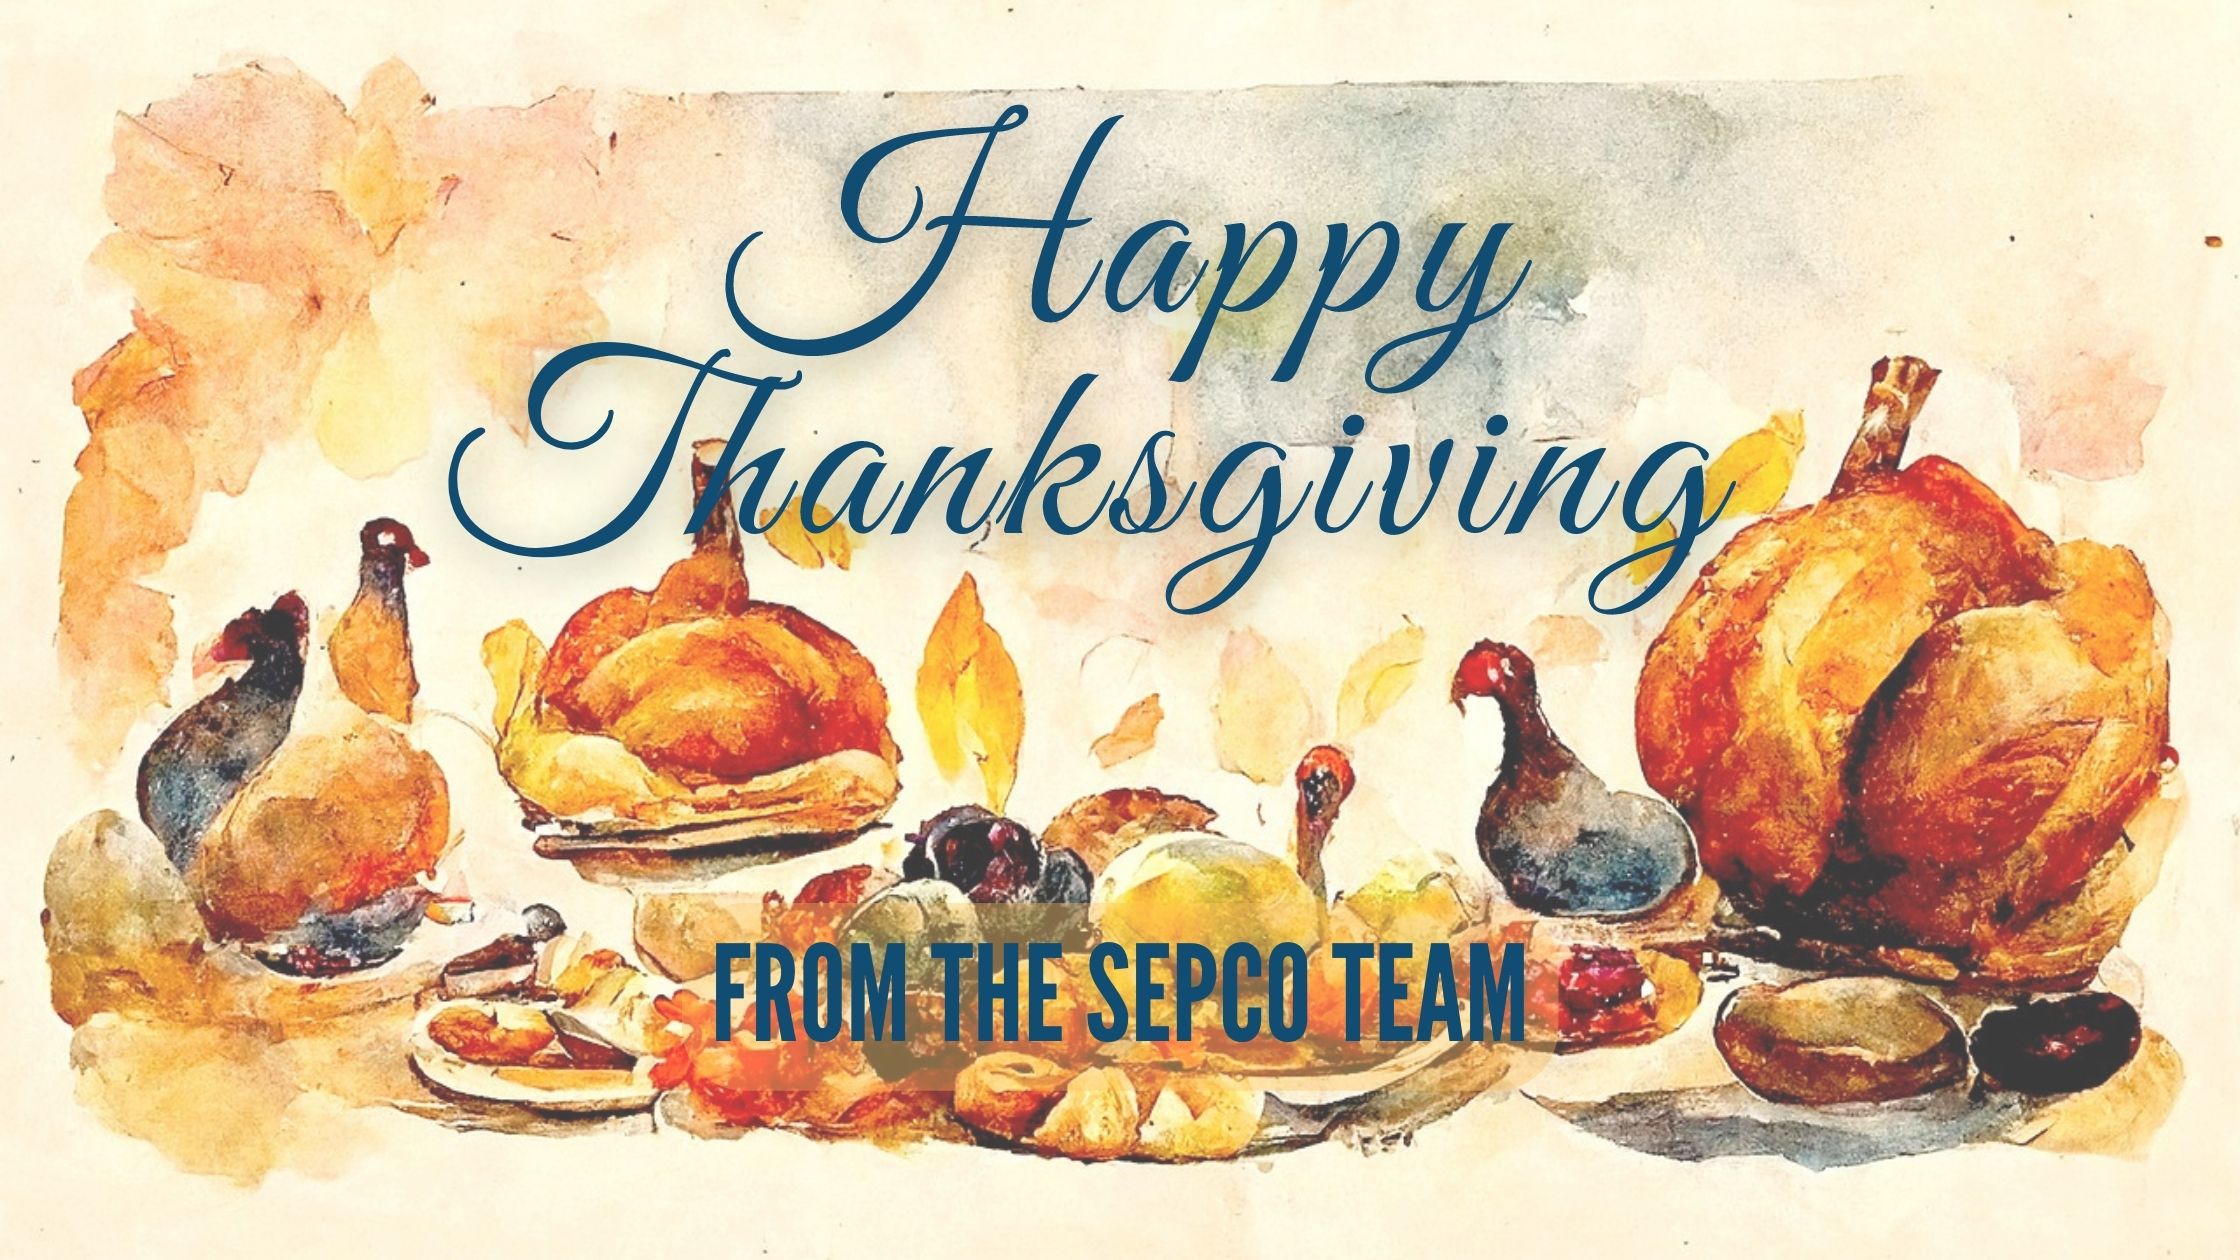 Wishing Everyone a Happy Thanksgiving from SEPCO